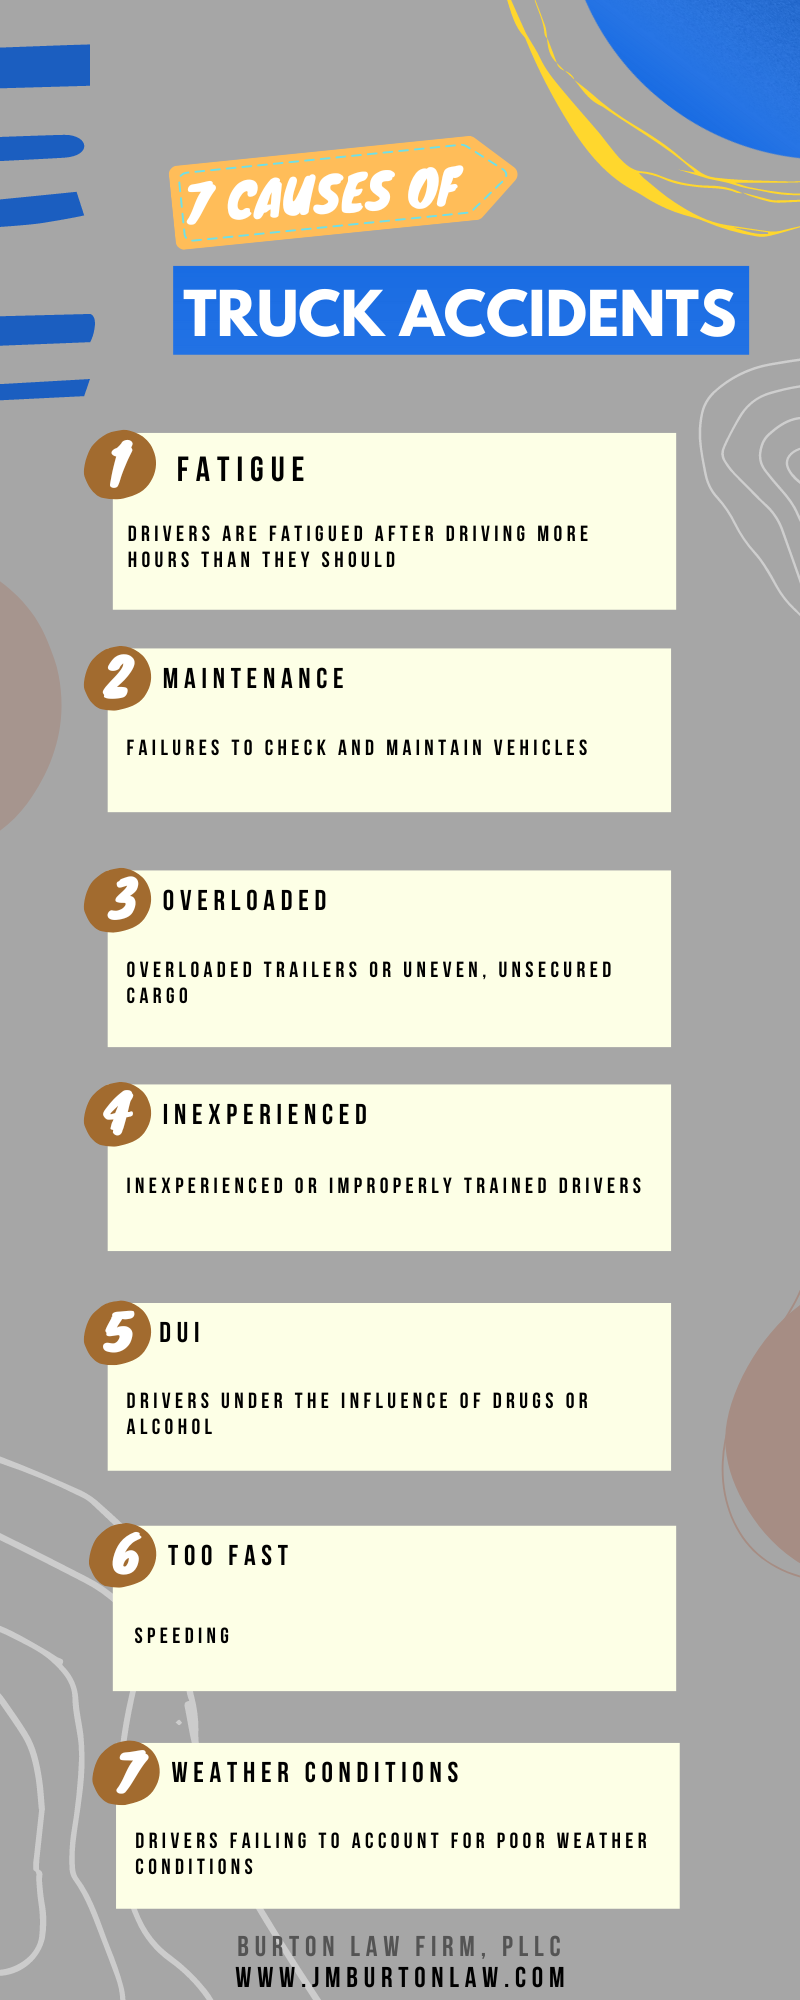 7 Causes of Truck Accidents Infographic